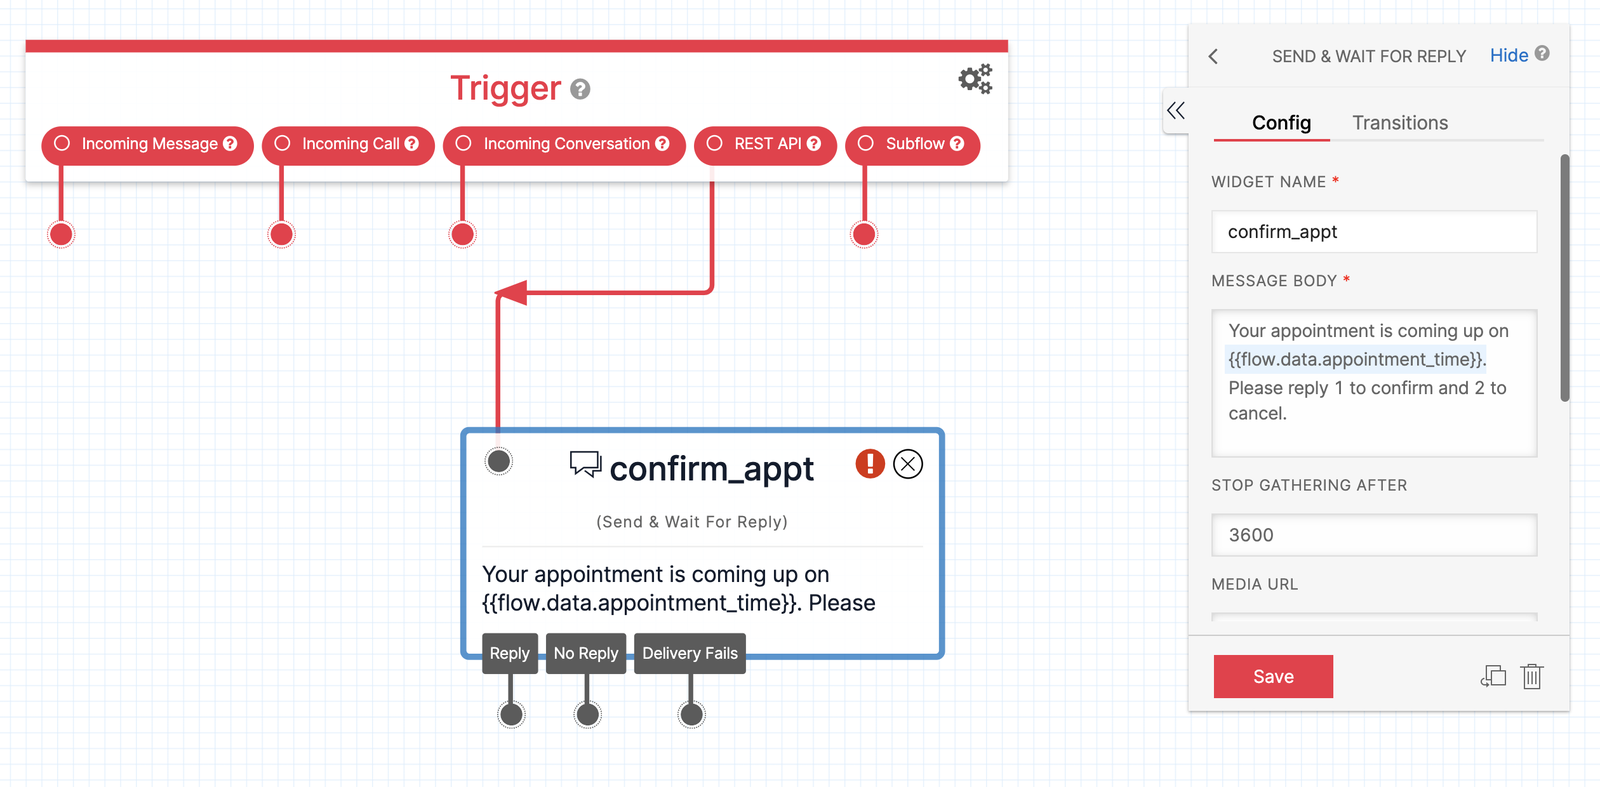 Twilio Studio Tutorial Appointment Reminders confirm_appt Widget shown with configuration panel to the right. The REST API trigger is connected to the confirm_appt Widget.